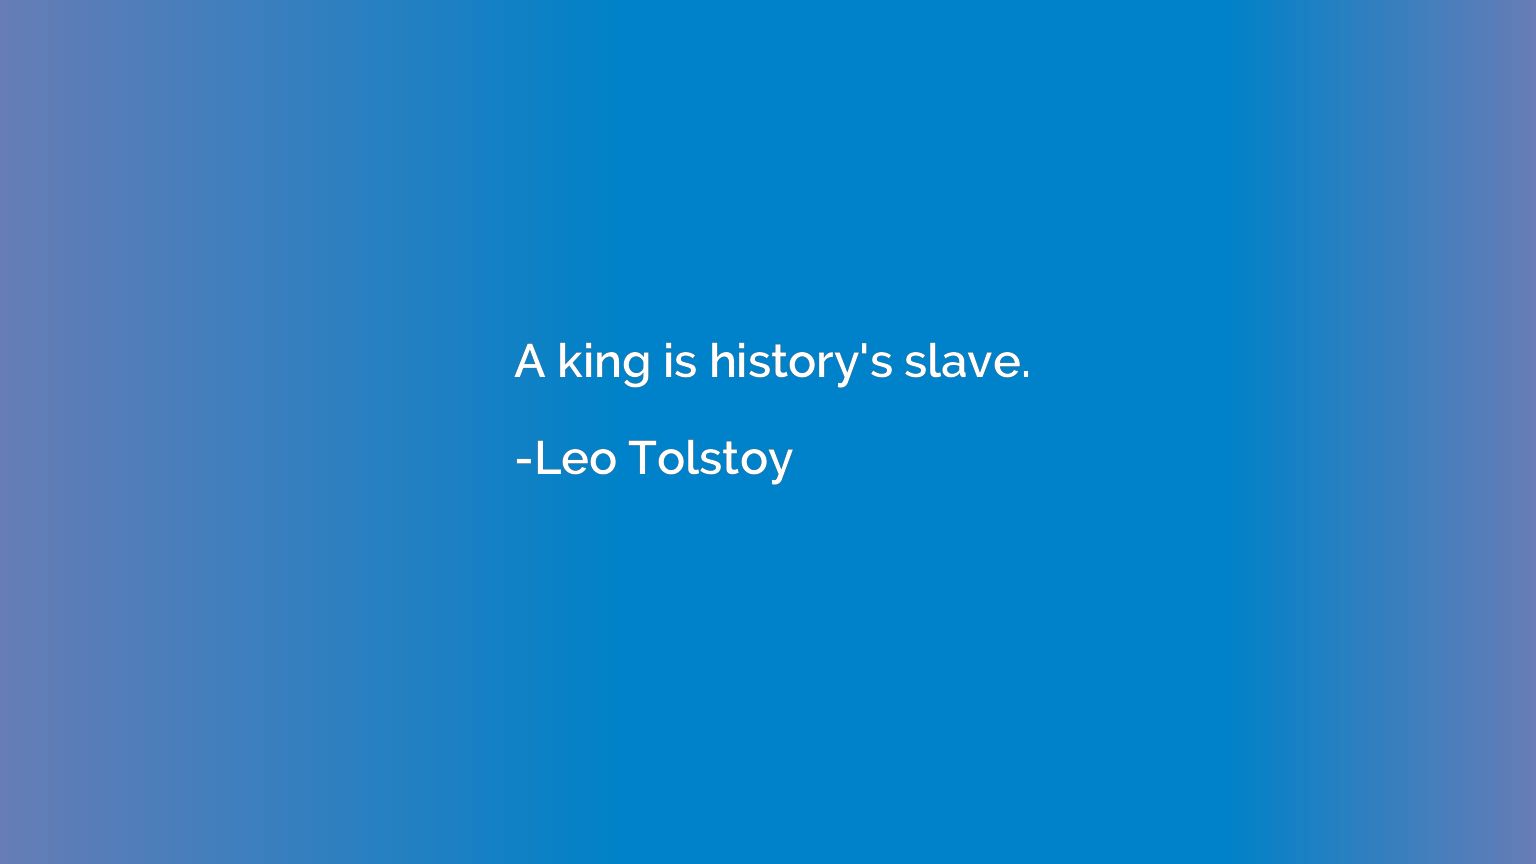 A king is history's slave.